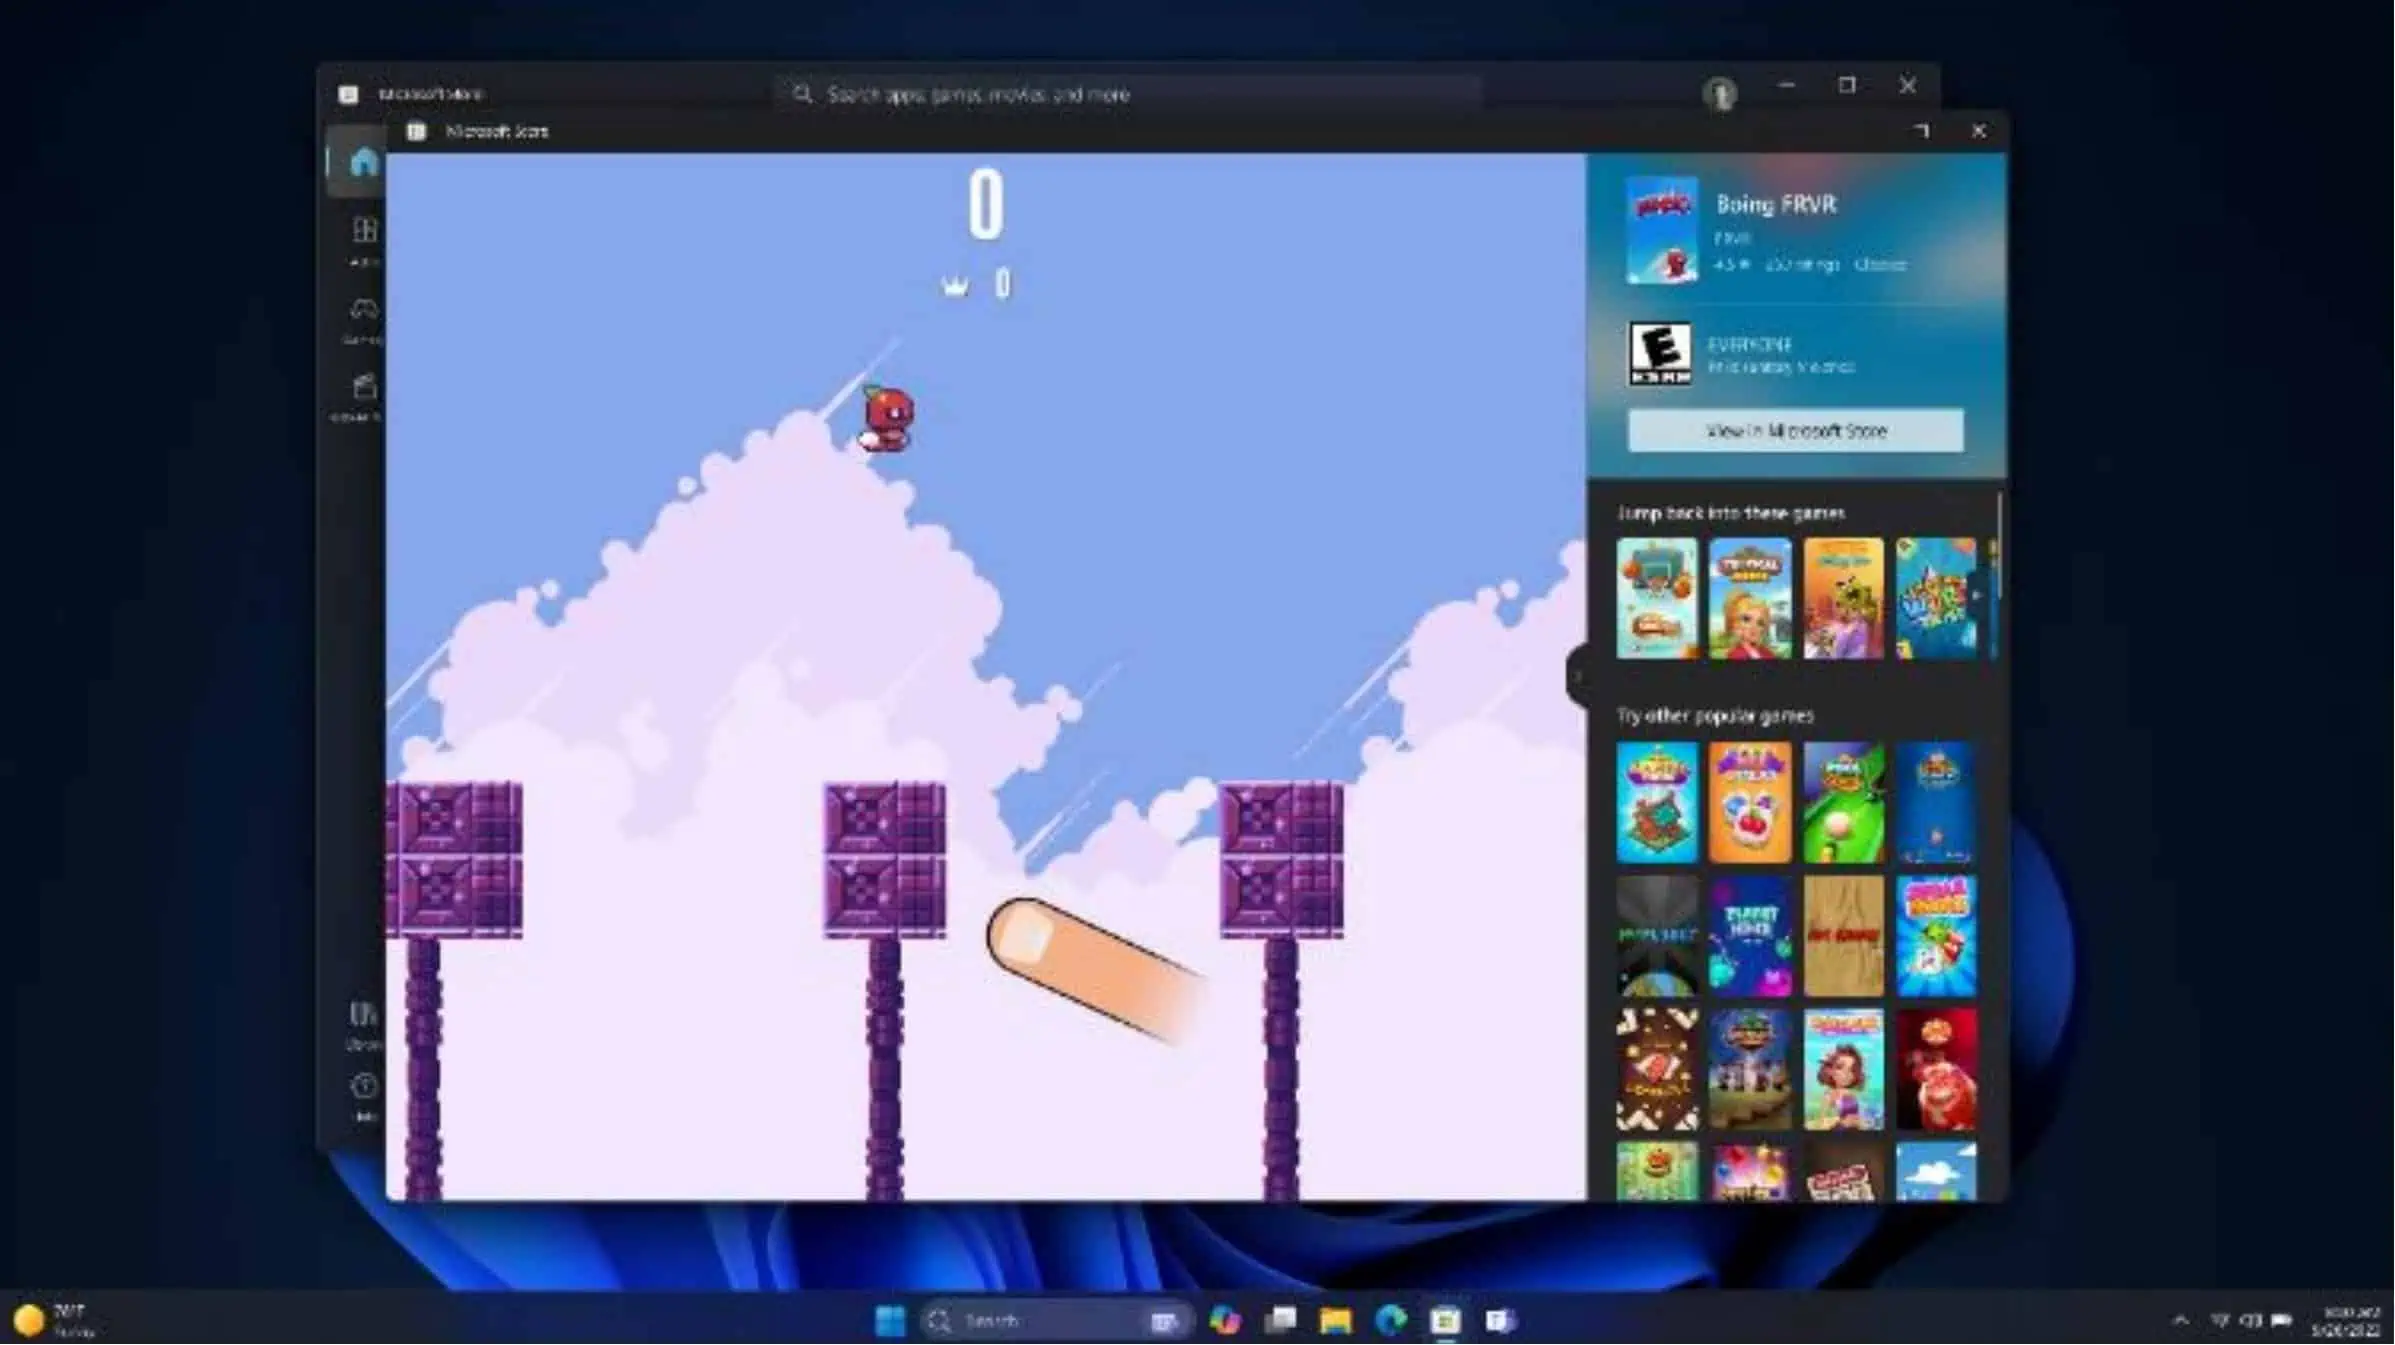 Instant Games adds instant fun to Windows 11, no download required